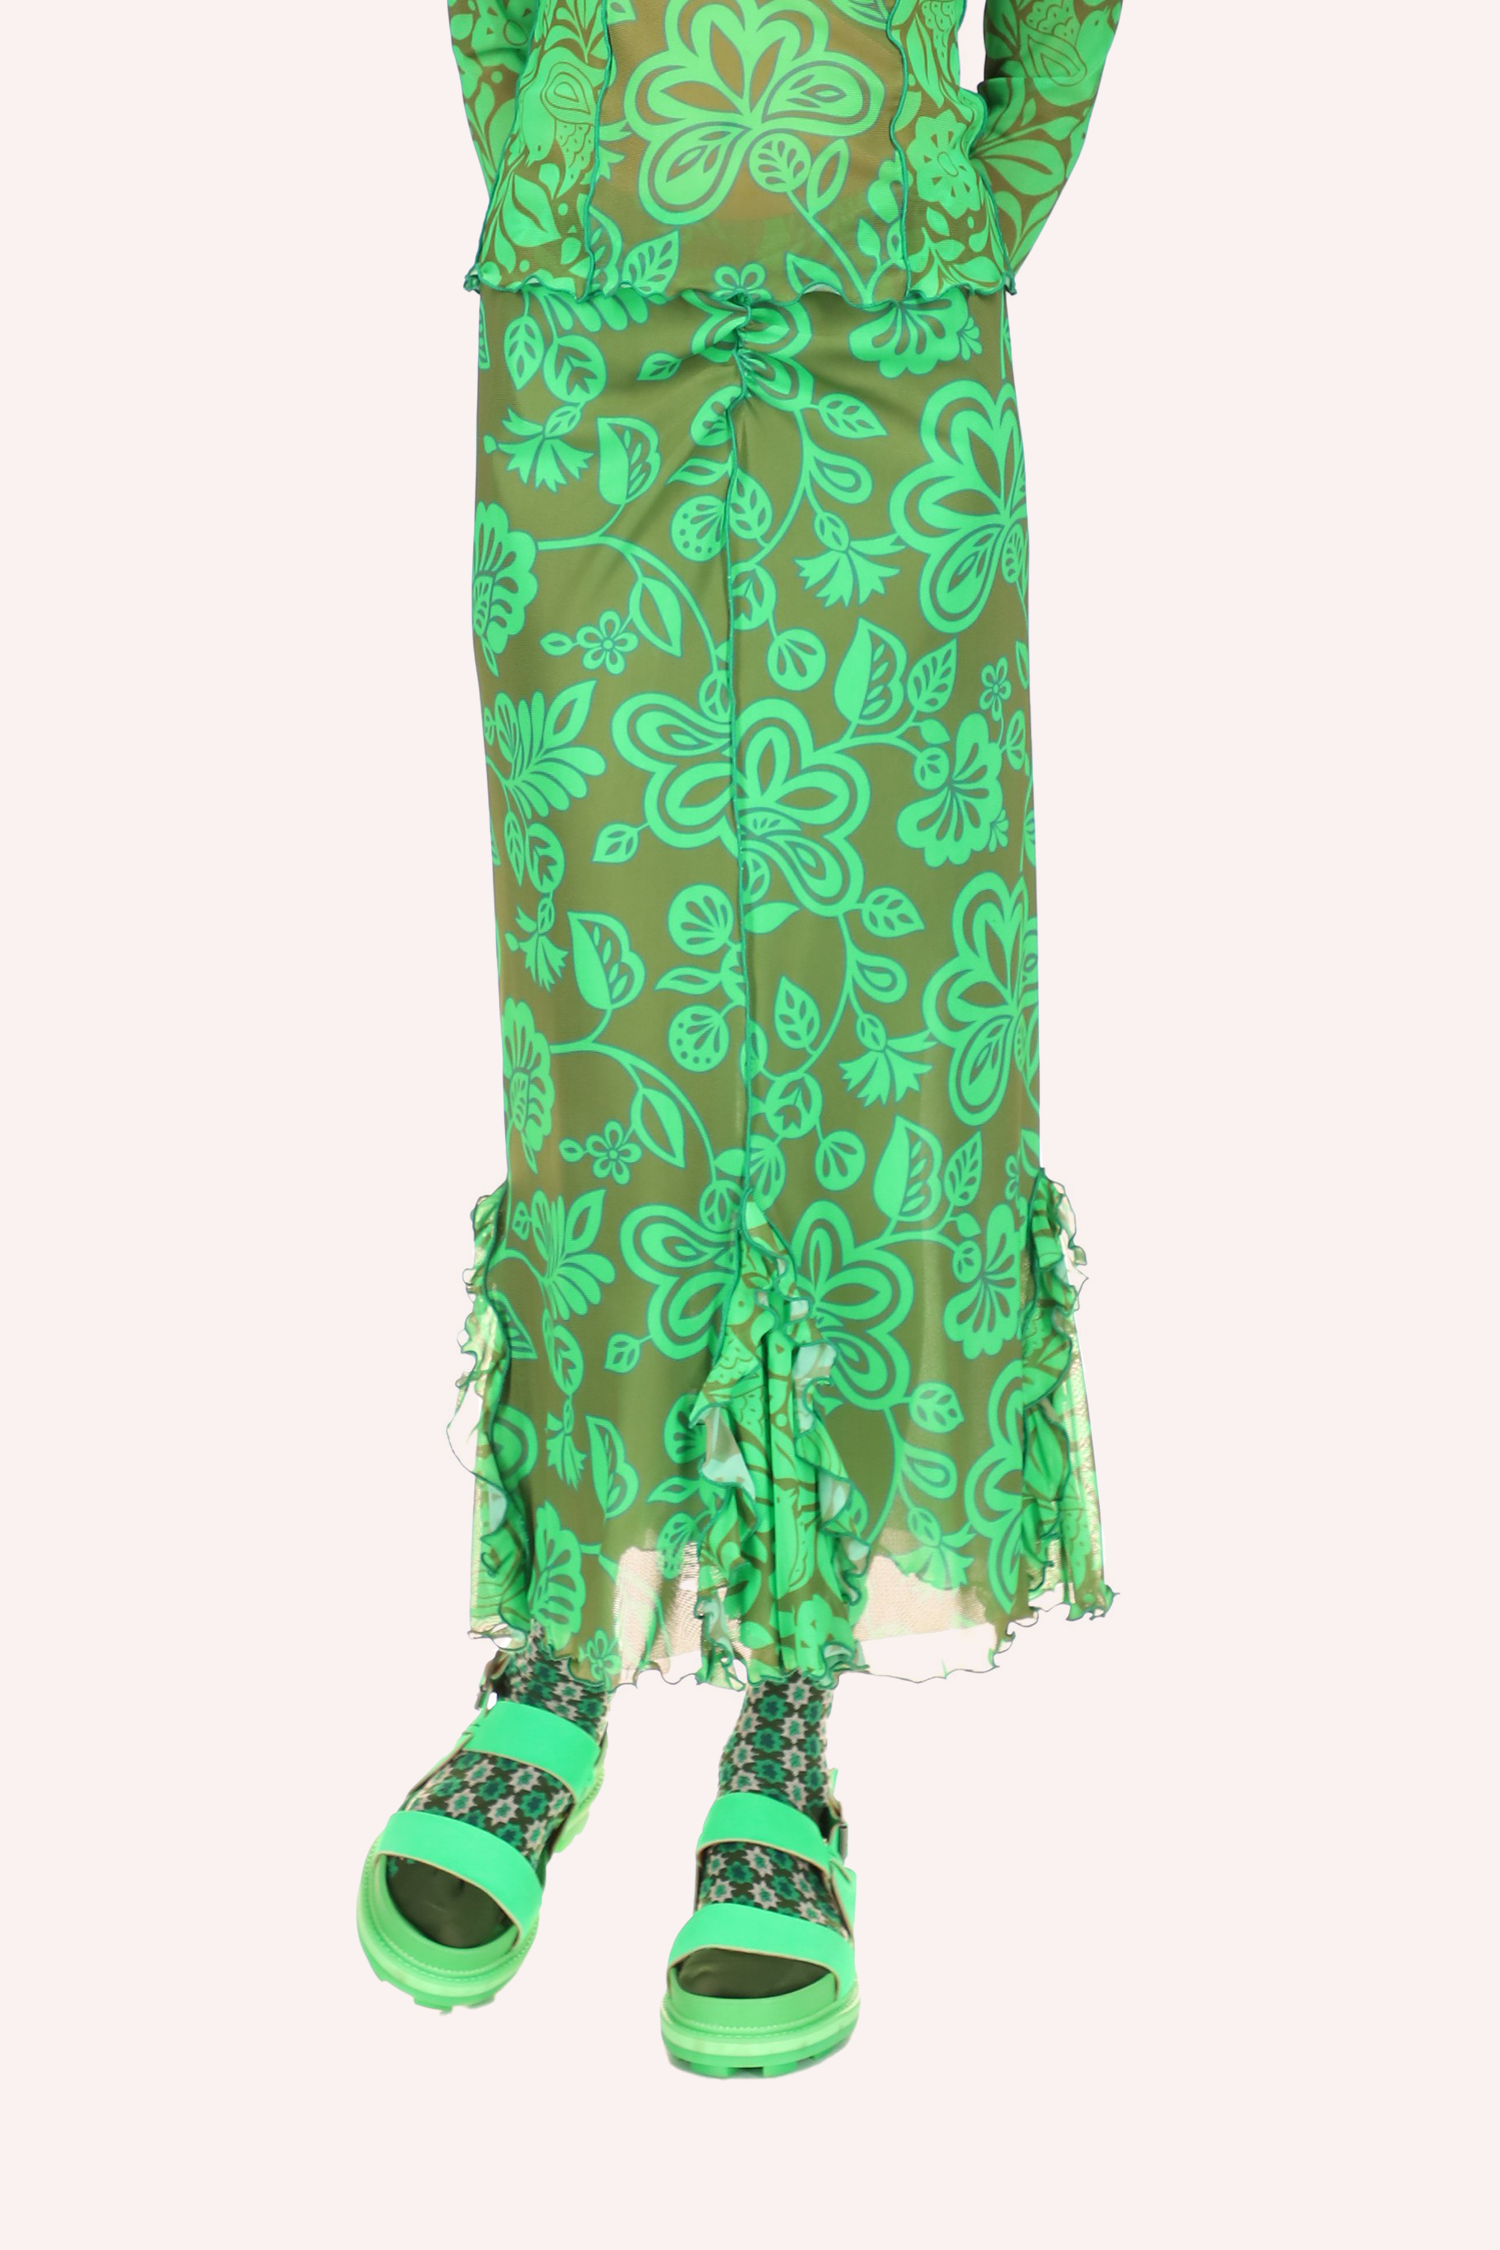 Paradisiac Combo Mesh Skirt Glo Green, with large green flowers on the mesh, the long green stiches in front